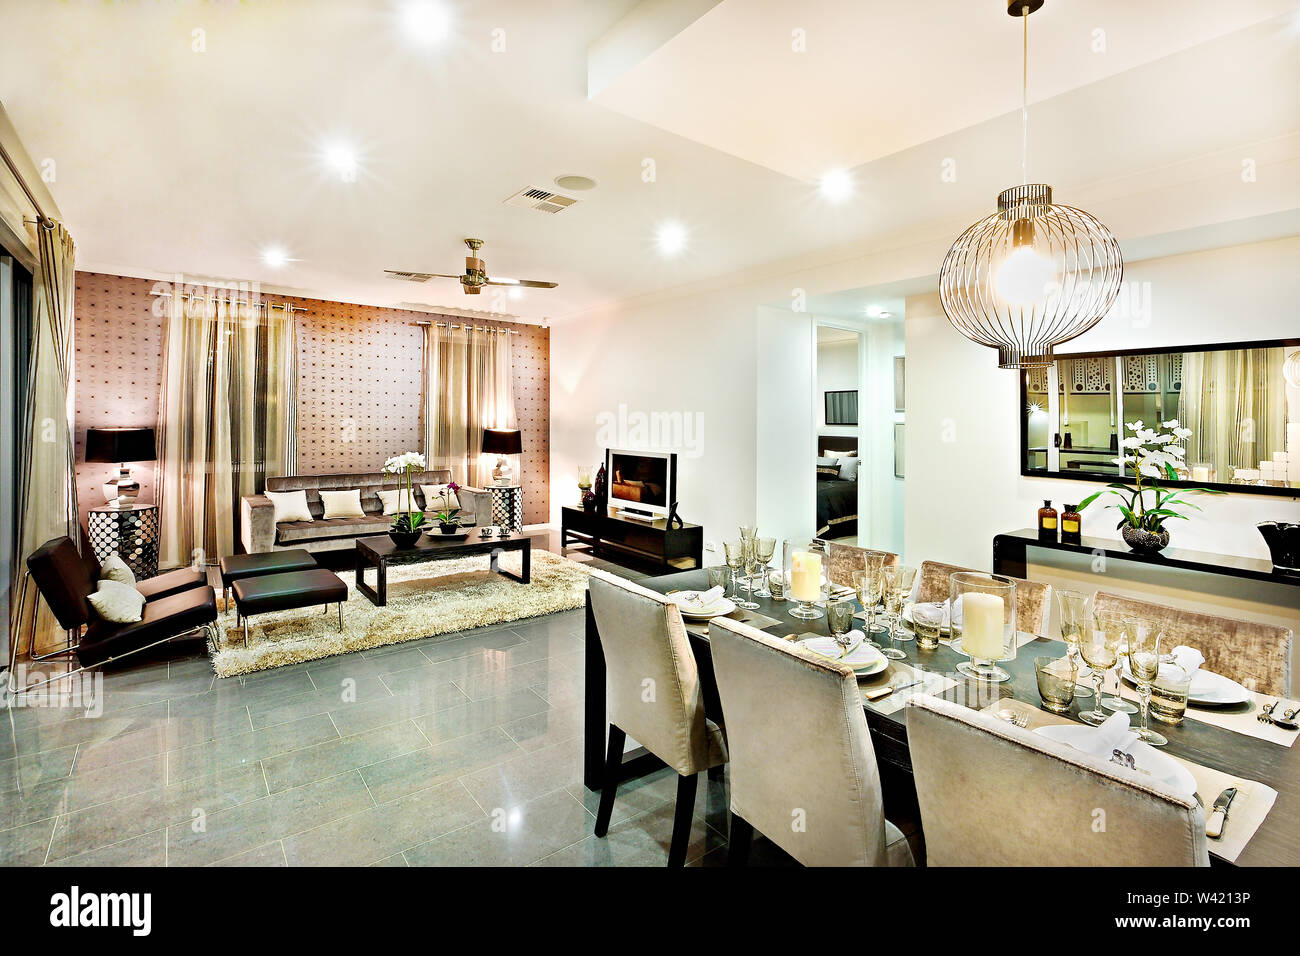 Luxury Living Room And Dining Area With Hanging Lights